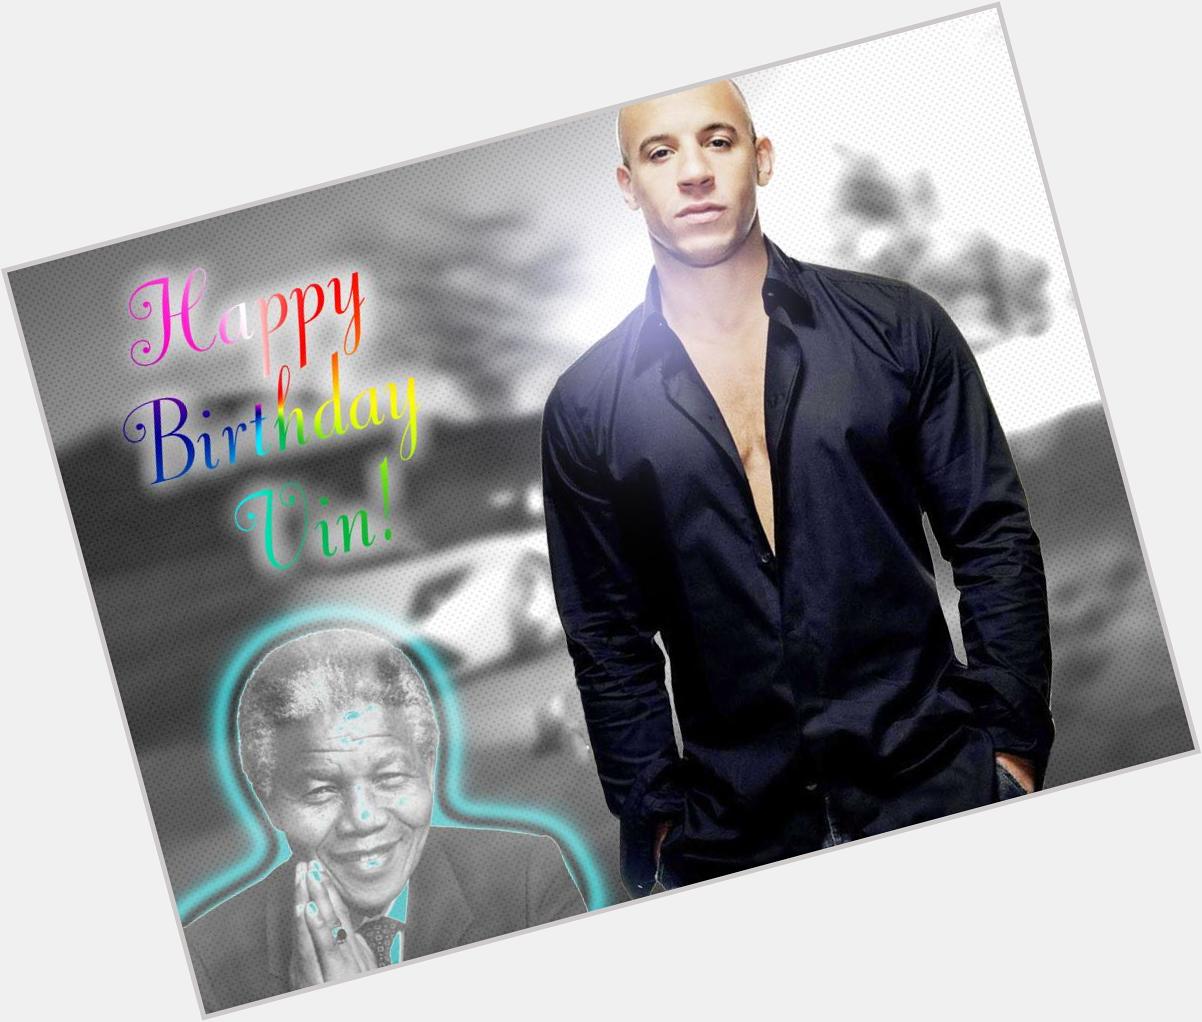 HAPPY BIRTHDAY VIN DIESEL and to a lesser extent Nelson Mandela. Vin has helped me raise over 1,200 for Pieta House 